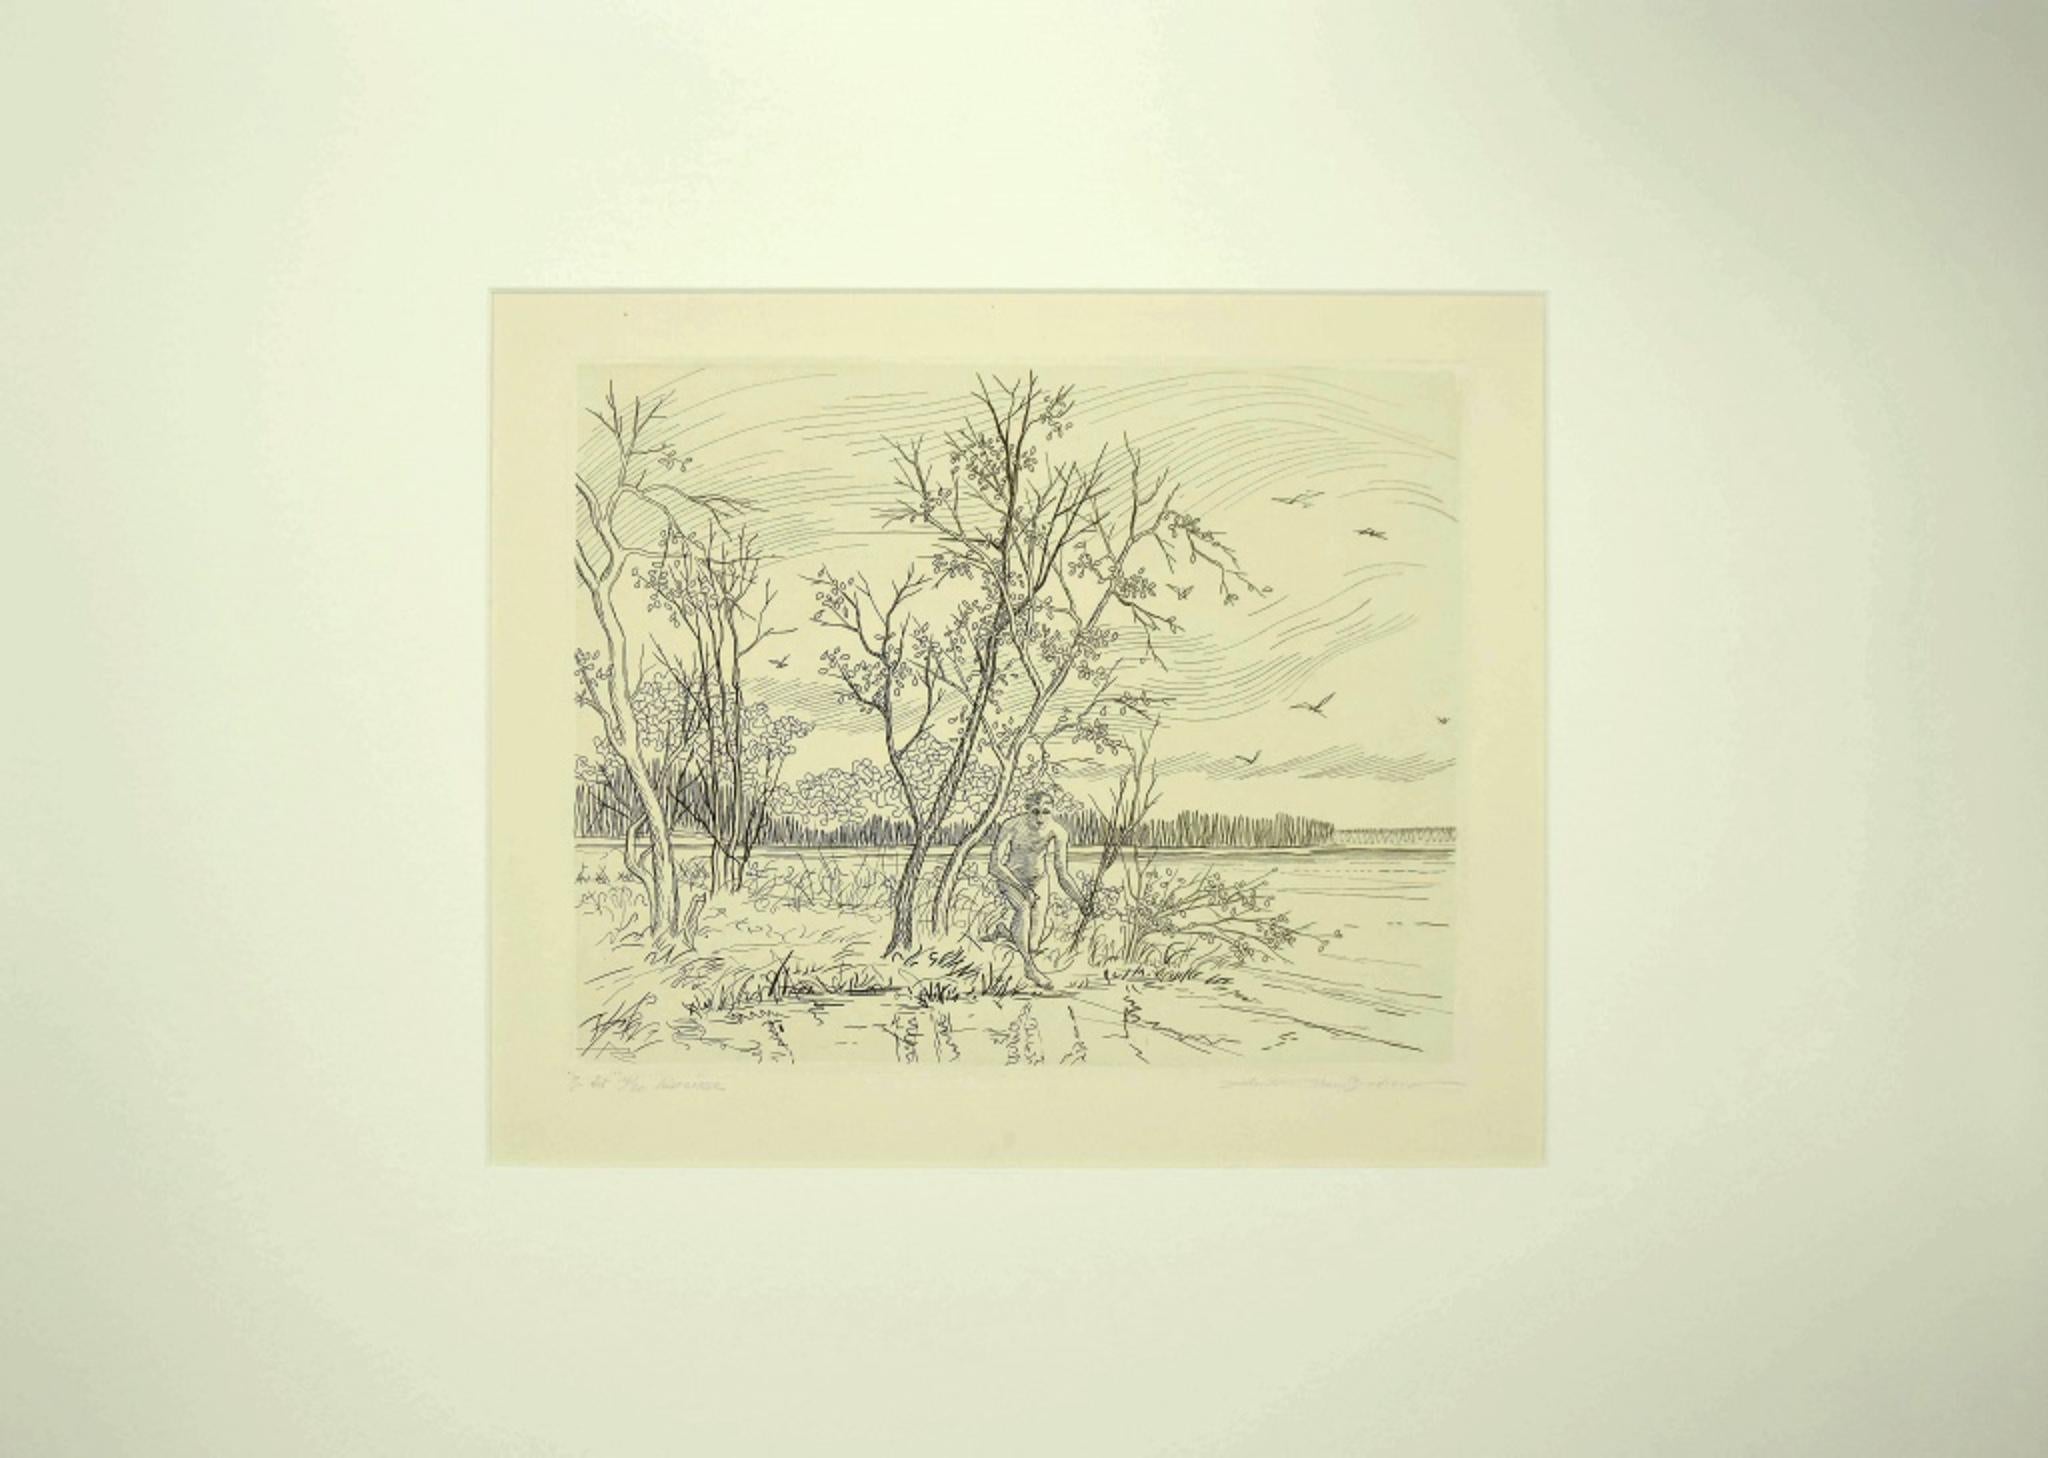 Narcisse - Original Etching by Andre Roland Brudieux - Mid-20th Century - Print by André Roland Brudieux